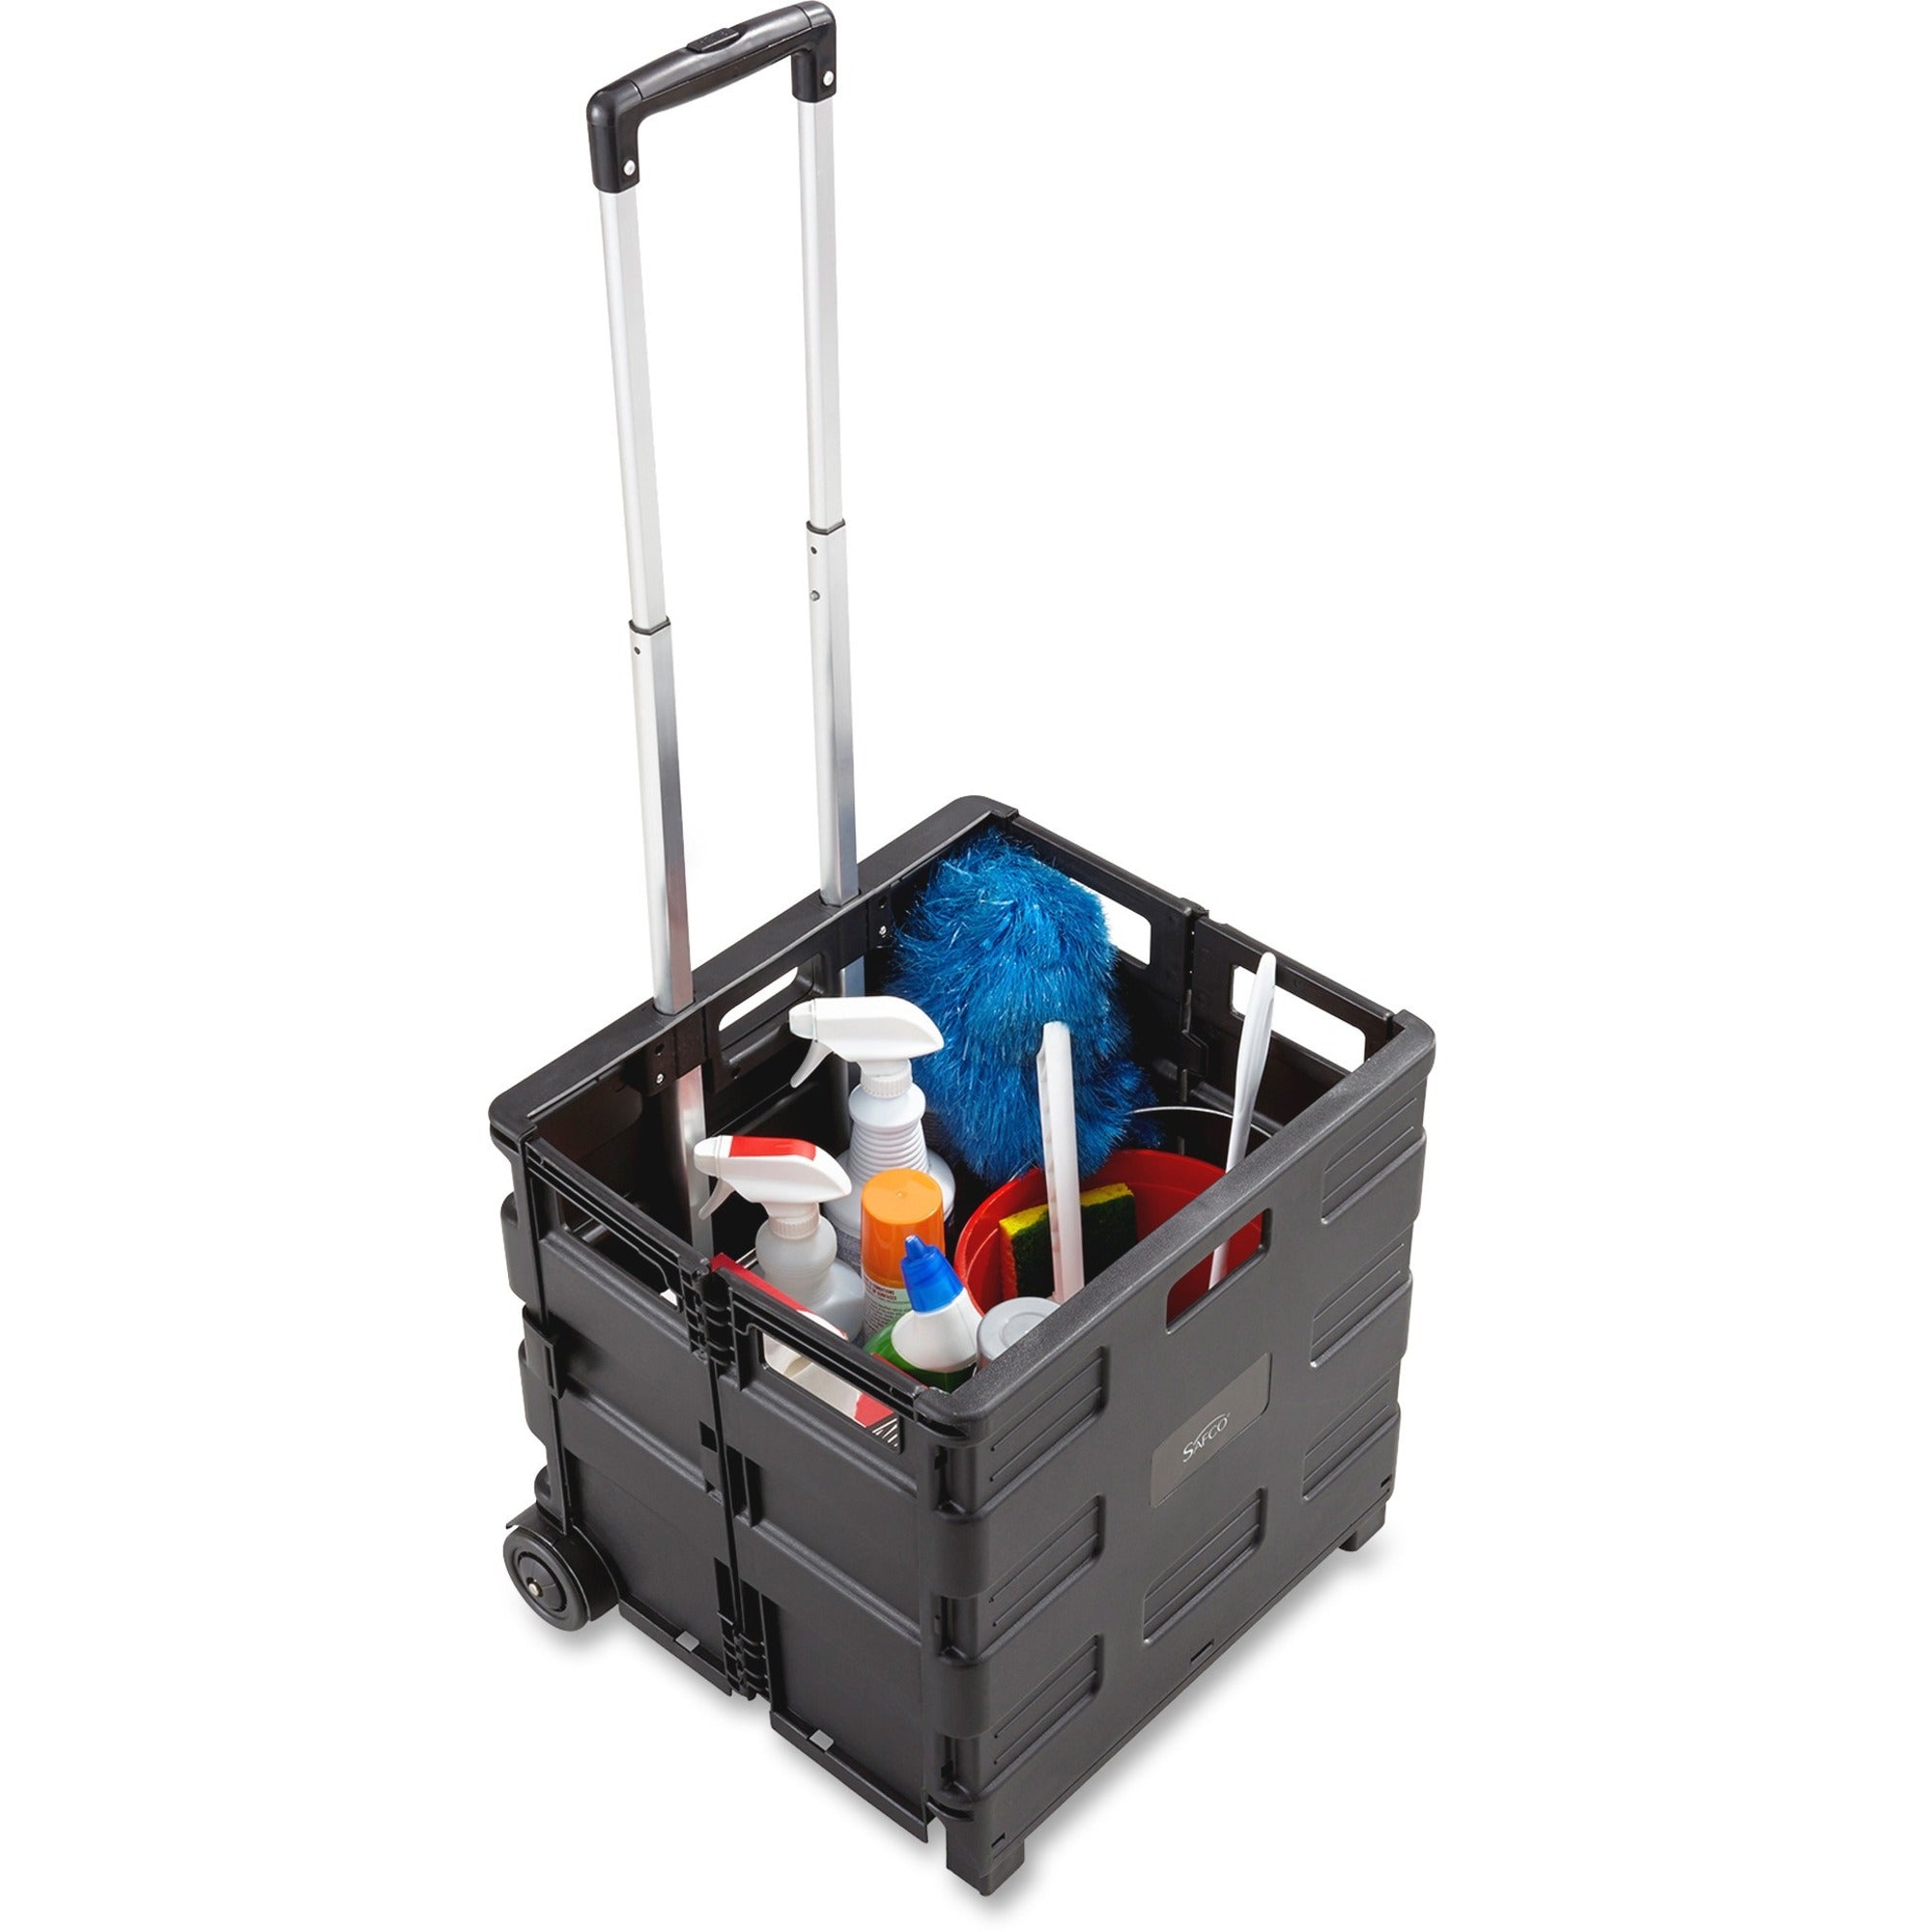 Safco Stow Away Folding Caddy - Telescopic Handle - 50 lb Capacity - 2 Casters - x 16.5" Width x 14.5" Depth x 39" Height - Black, Silver - 1 Each - 